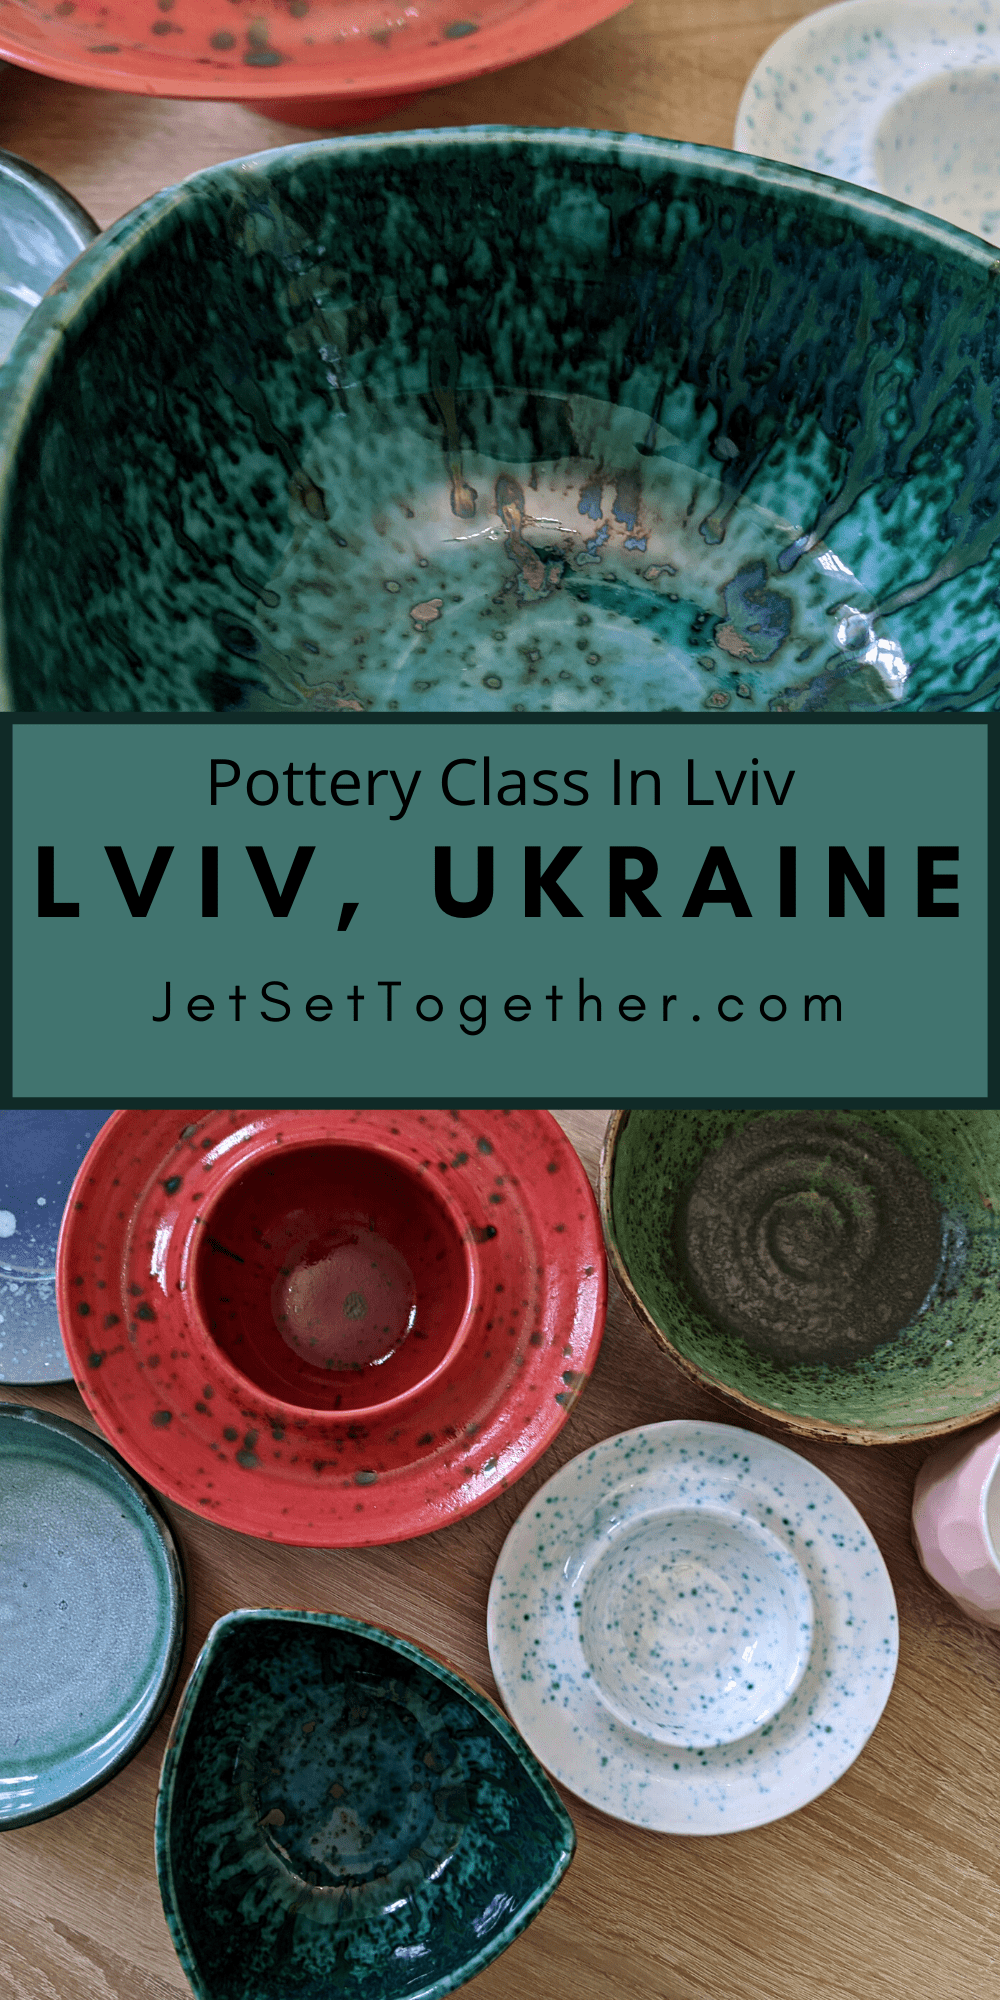 Pottery Class In Lviv